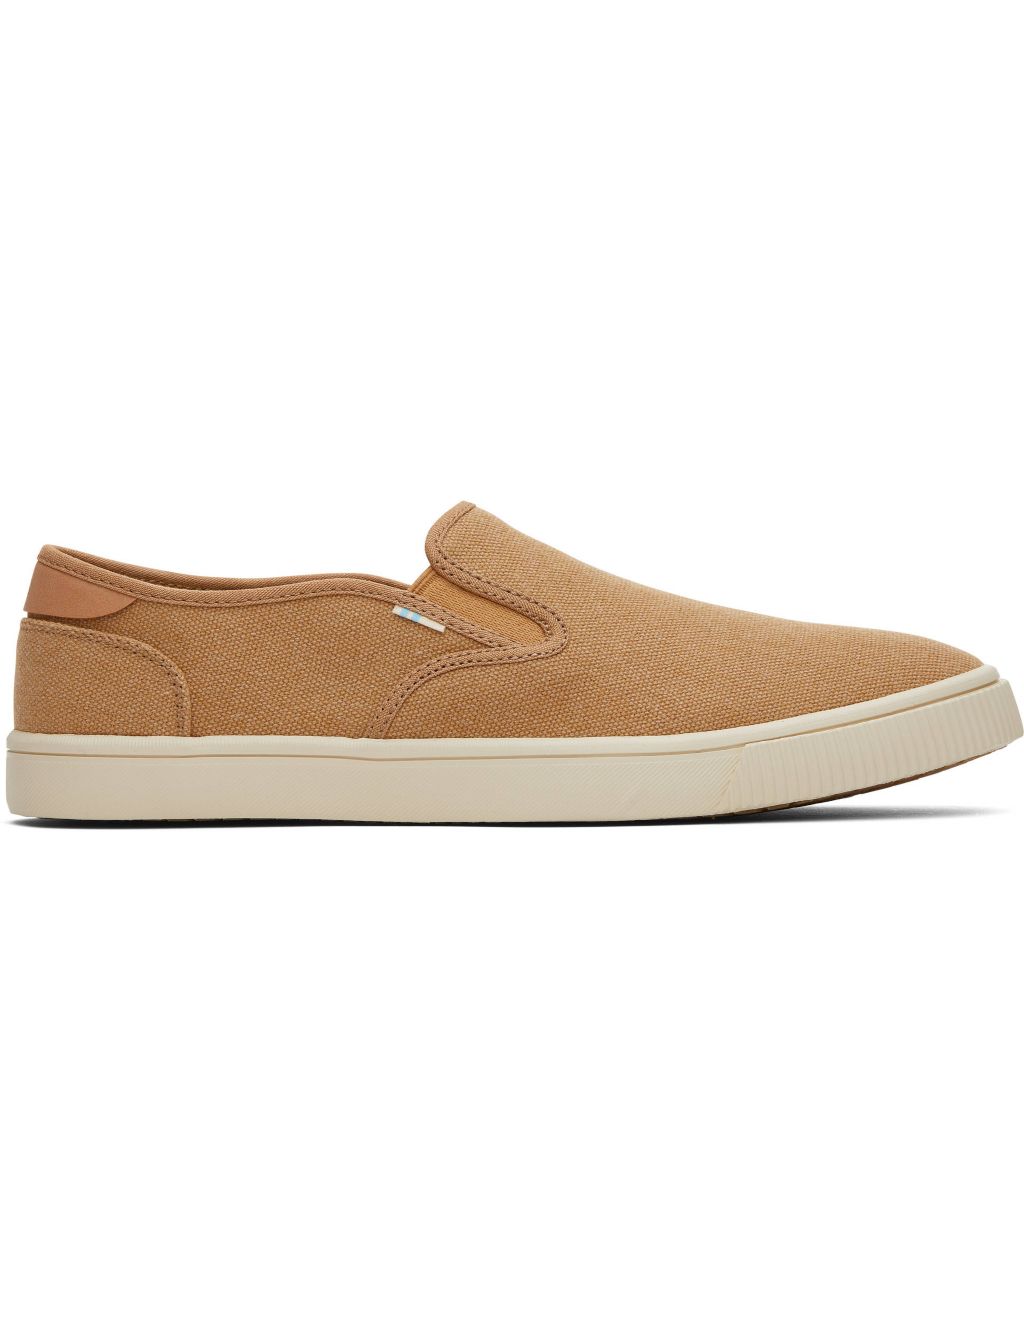 Canvas Slip-On Trainers image 1